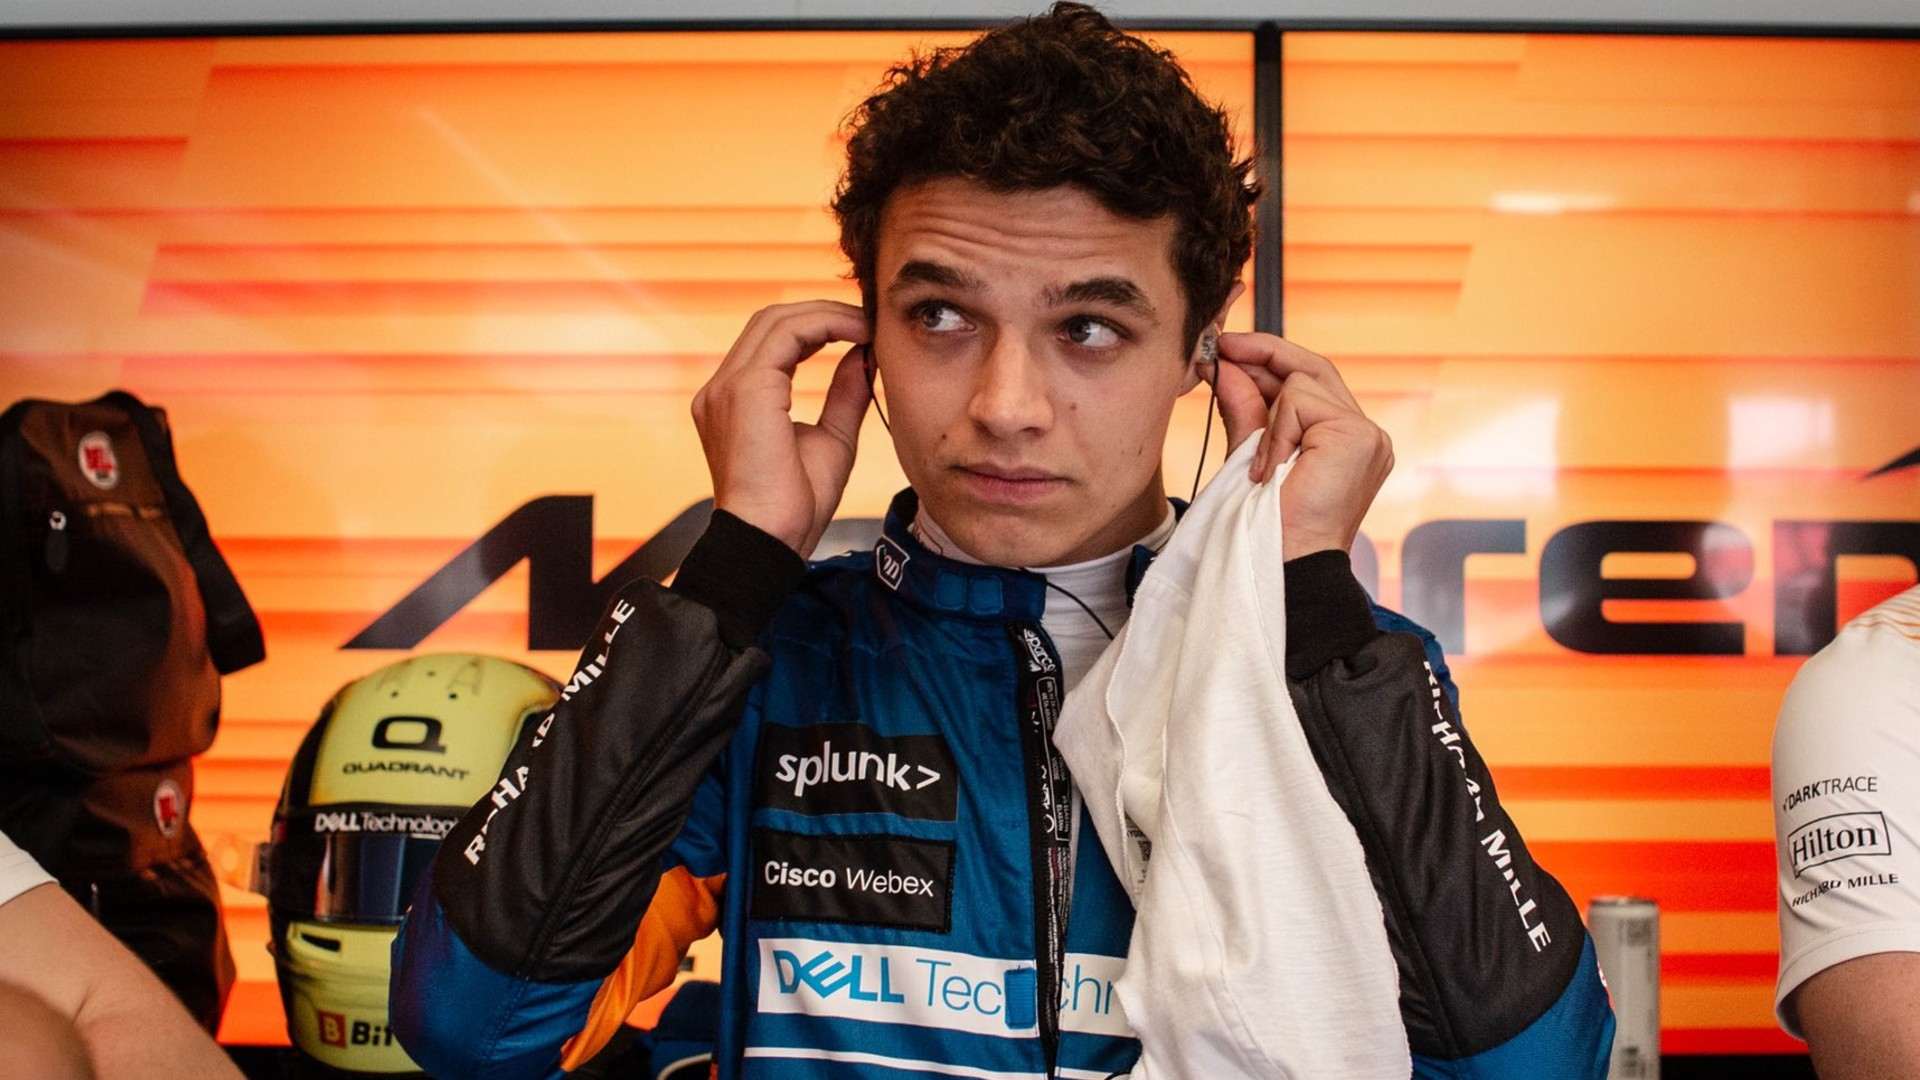 Lando Norris amazed by fan reactions after opening up on mental health